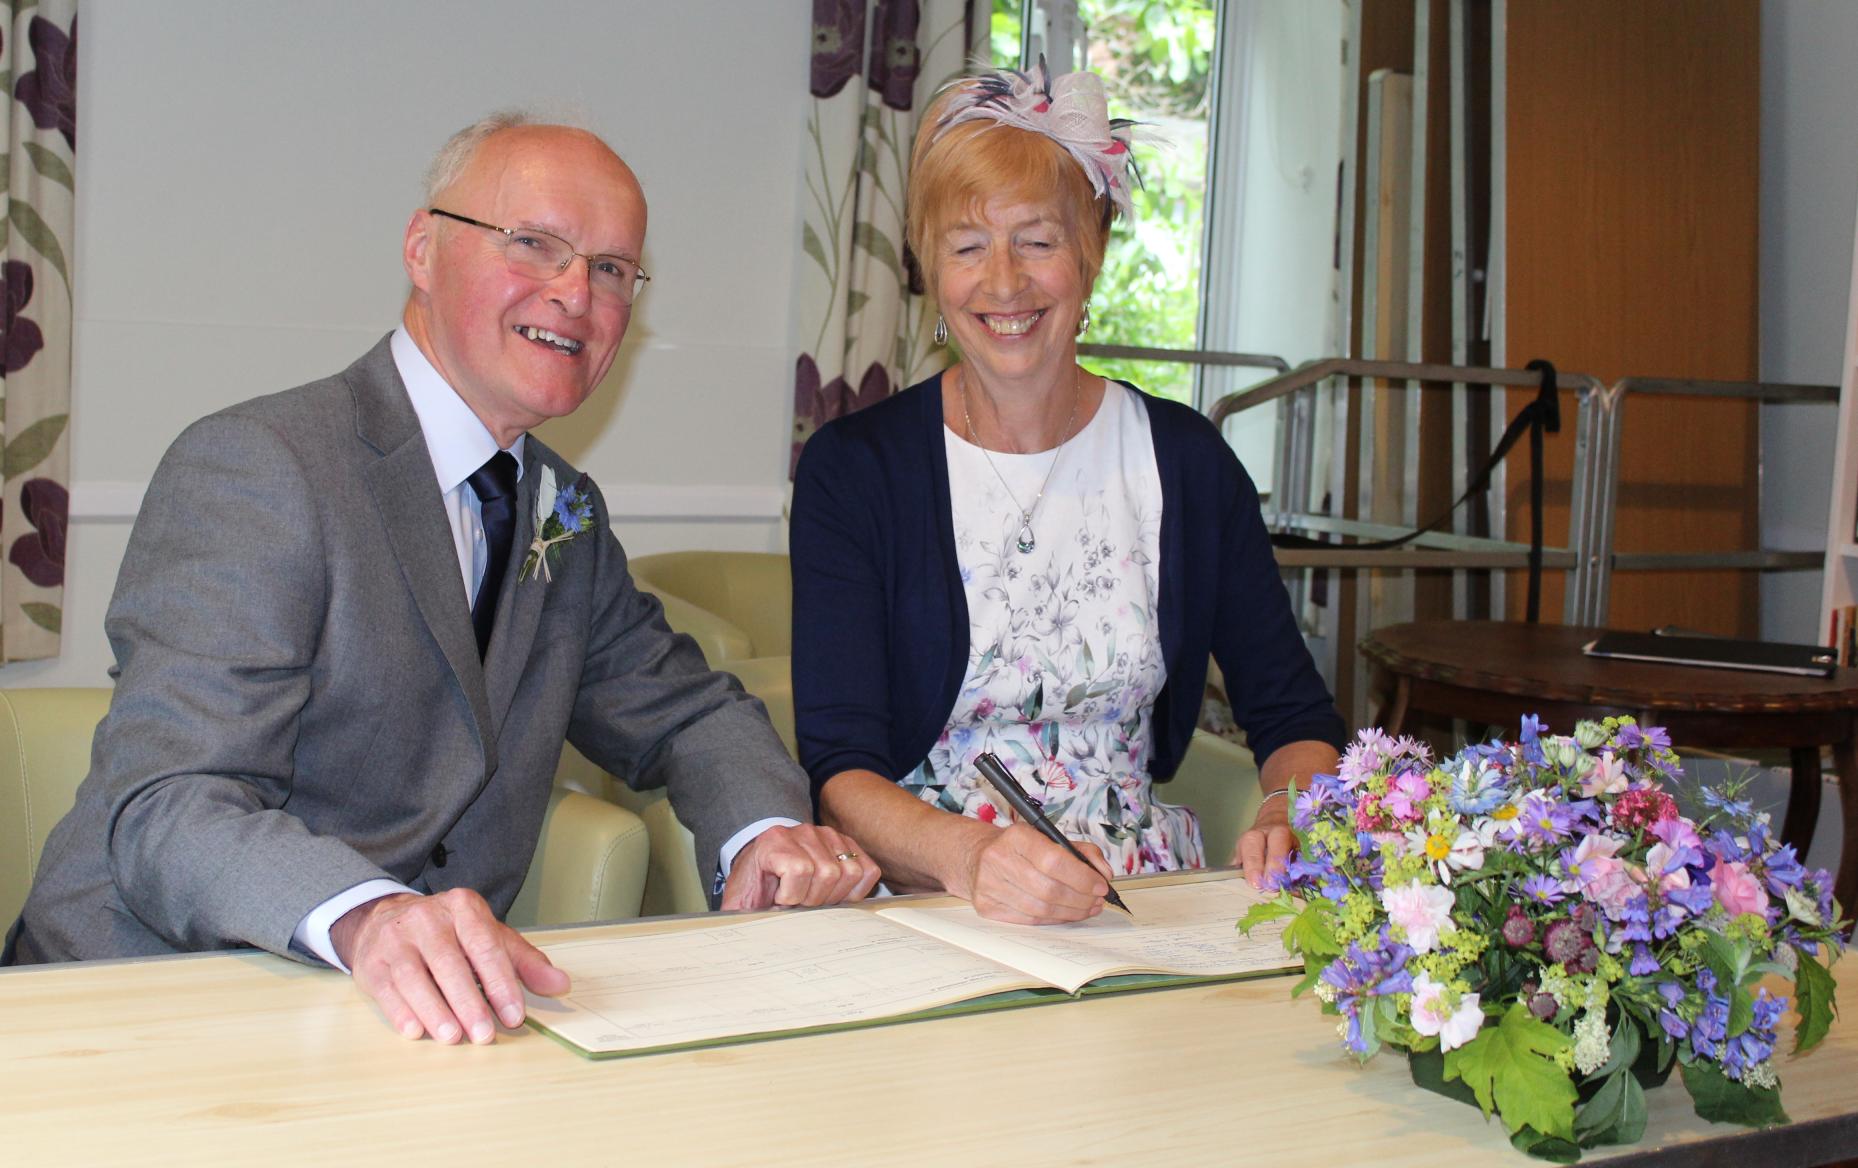 [Monday 5th June, Trish Signing the Register at the Watford Quaker Meeting House.